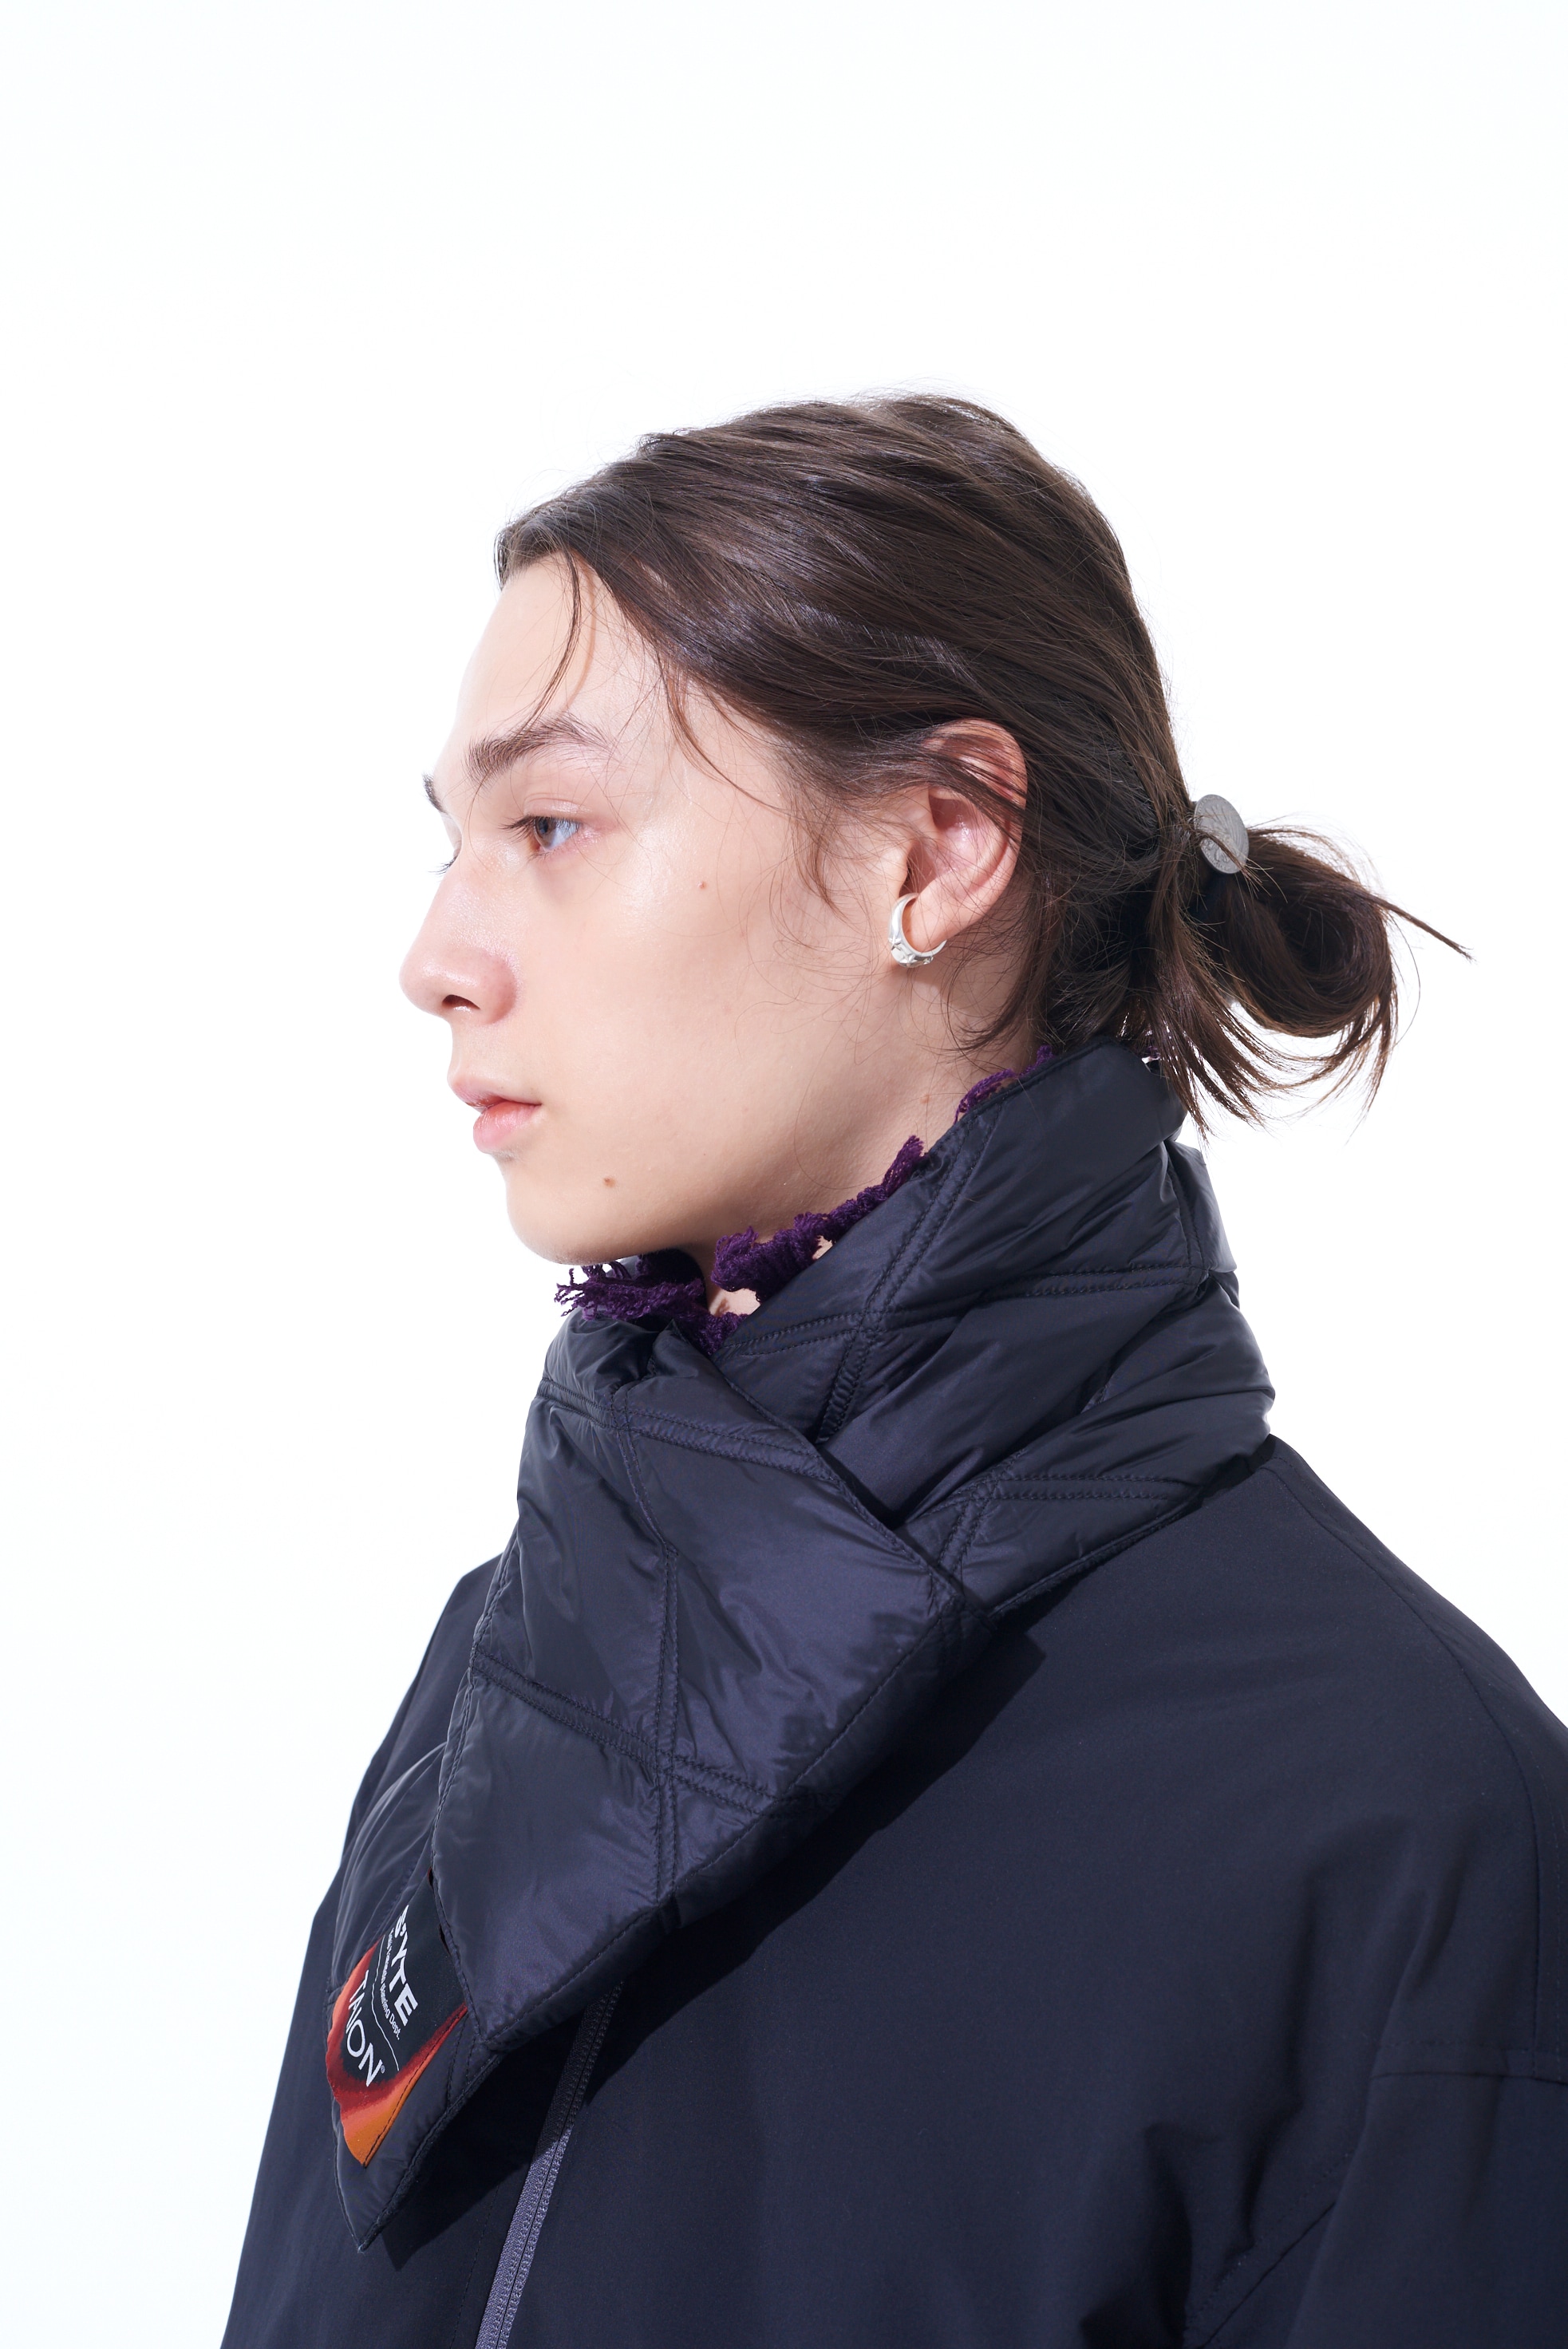 【S'YTE x TAION】Collaboration Collection QUILTED DOWN SCARF